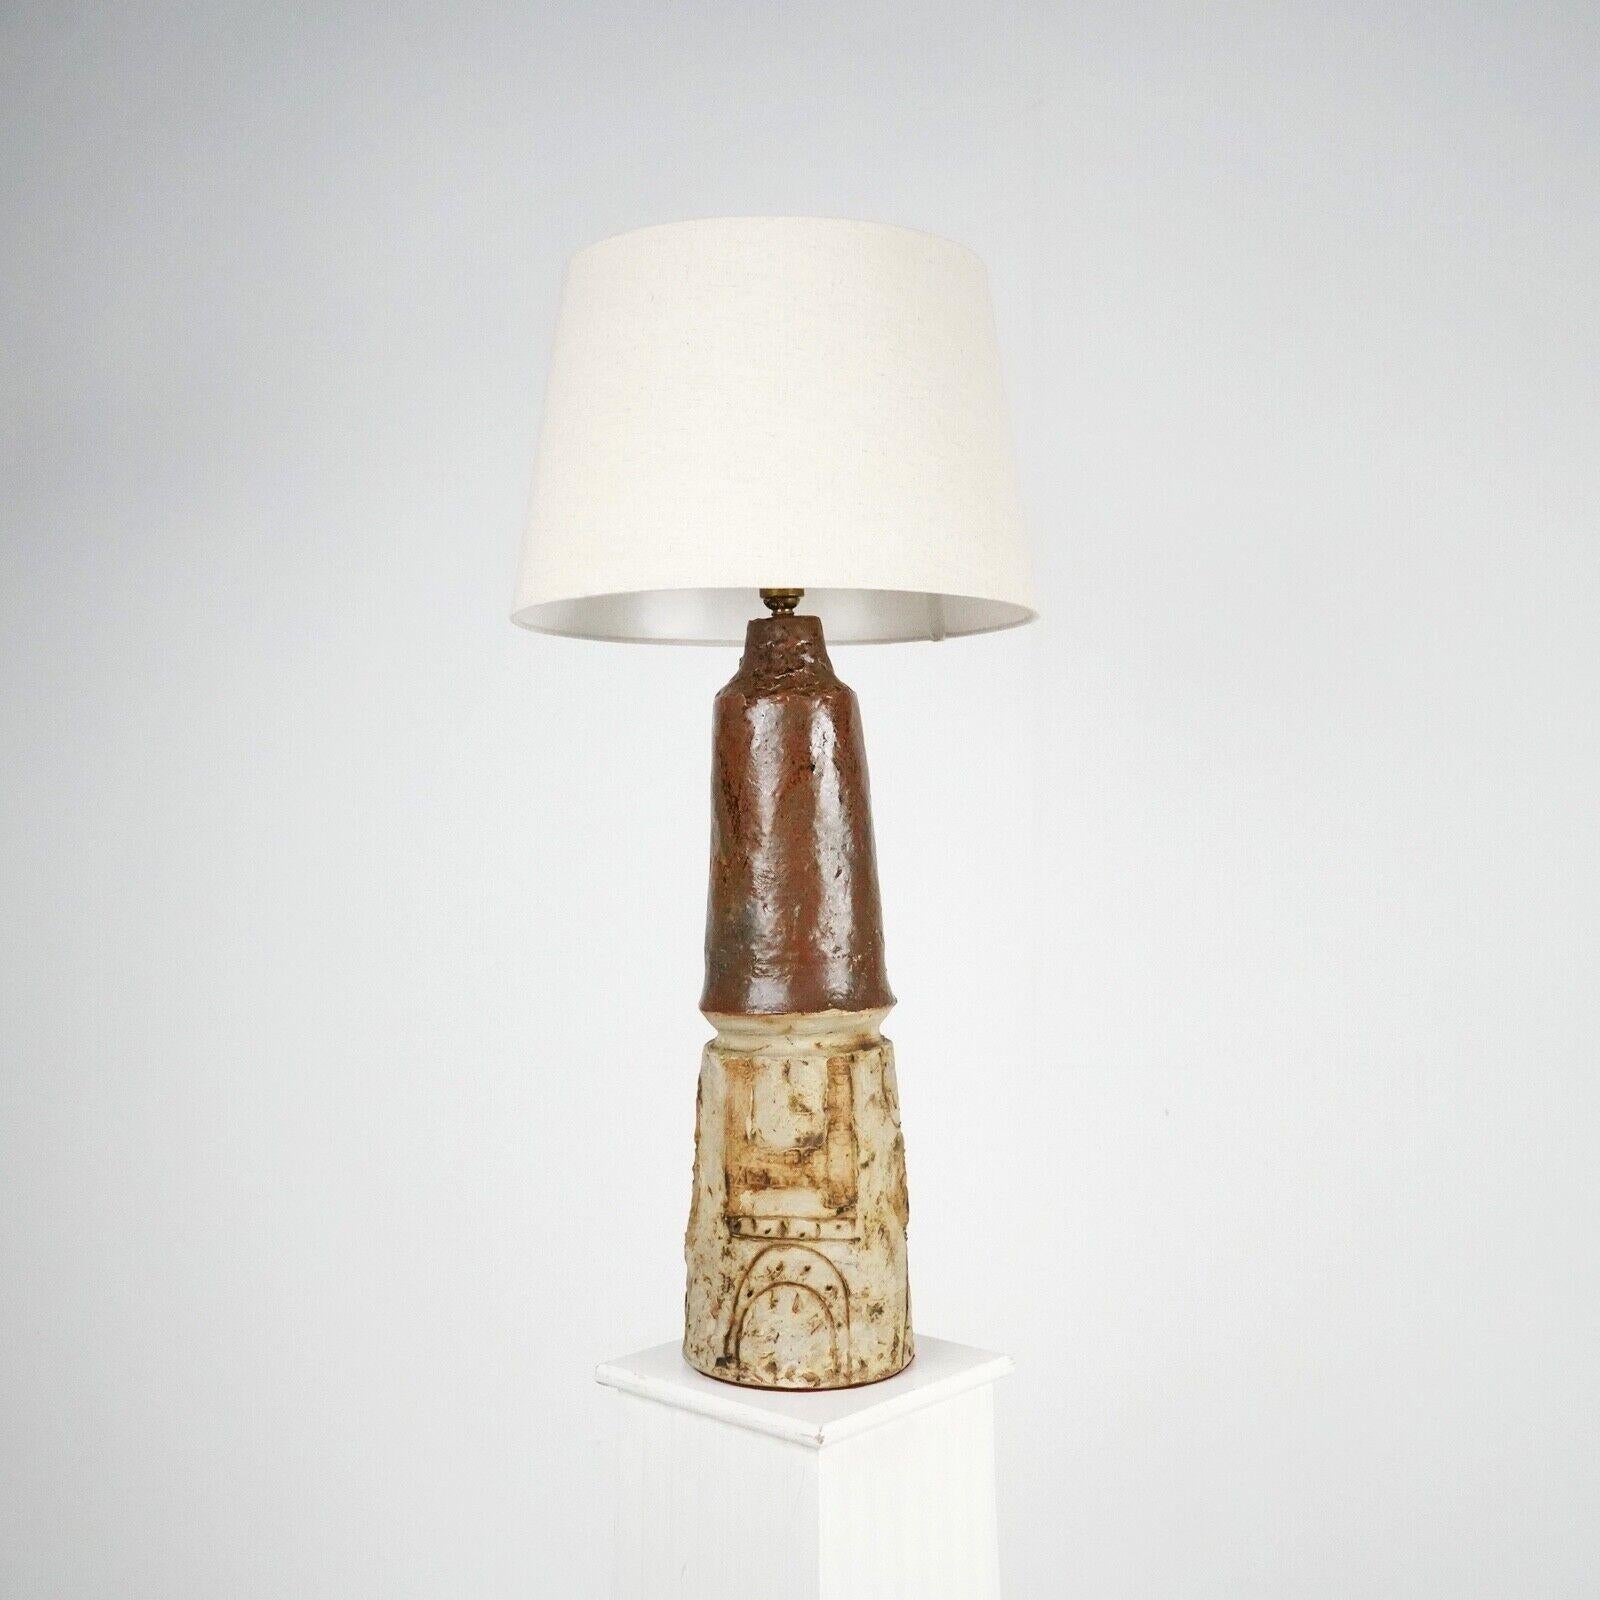 A handcrafted studio ceramic table lamp with sculptural design and natural form decoration. A dark brown glaze at the top if the base which is then mirrored in the decoration designs at the bottom which has a Bernard Rooke look about them.